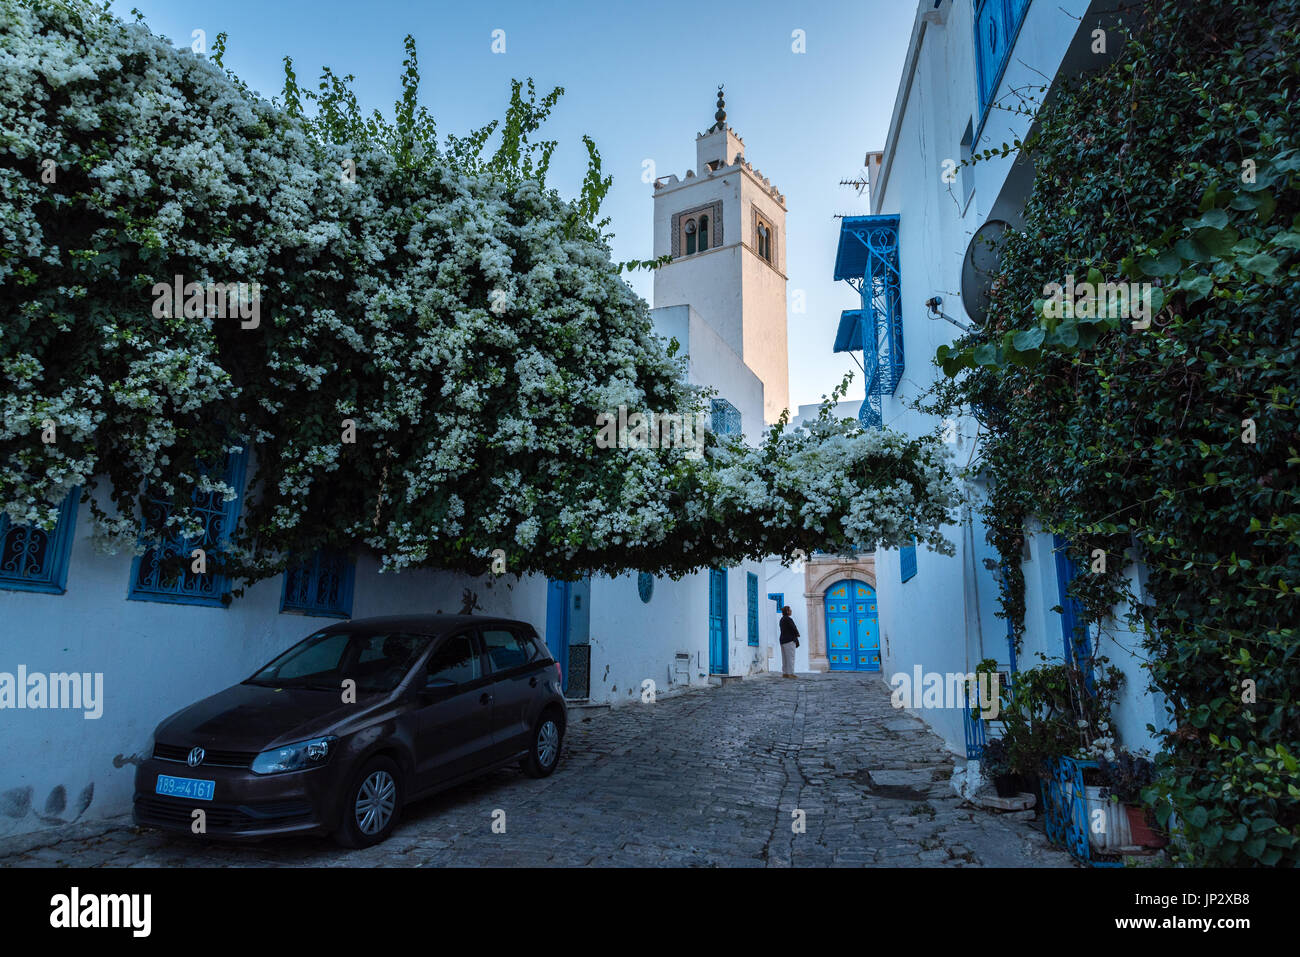 Car in an Alley, and Mosque Stock Photo